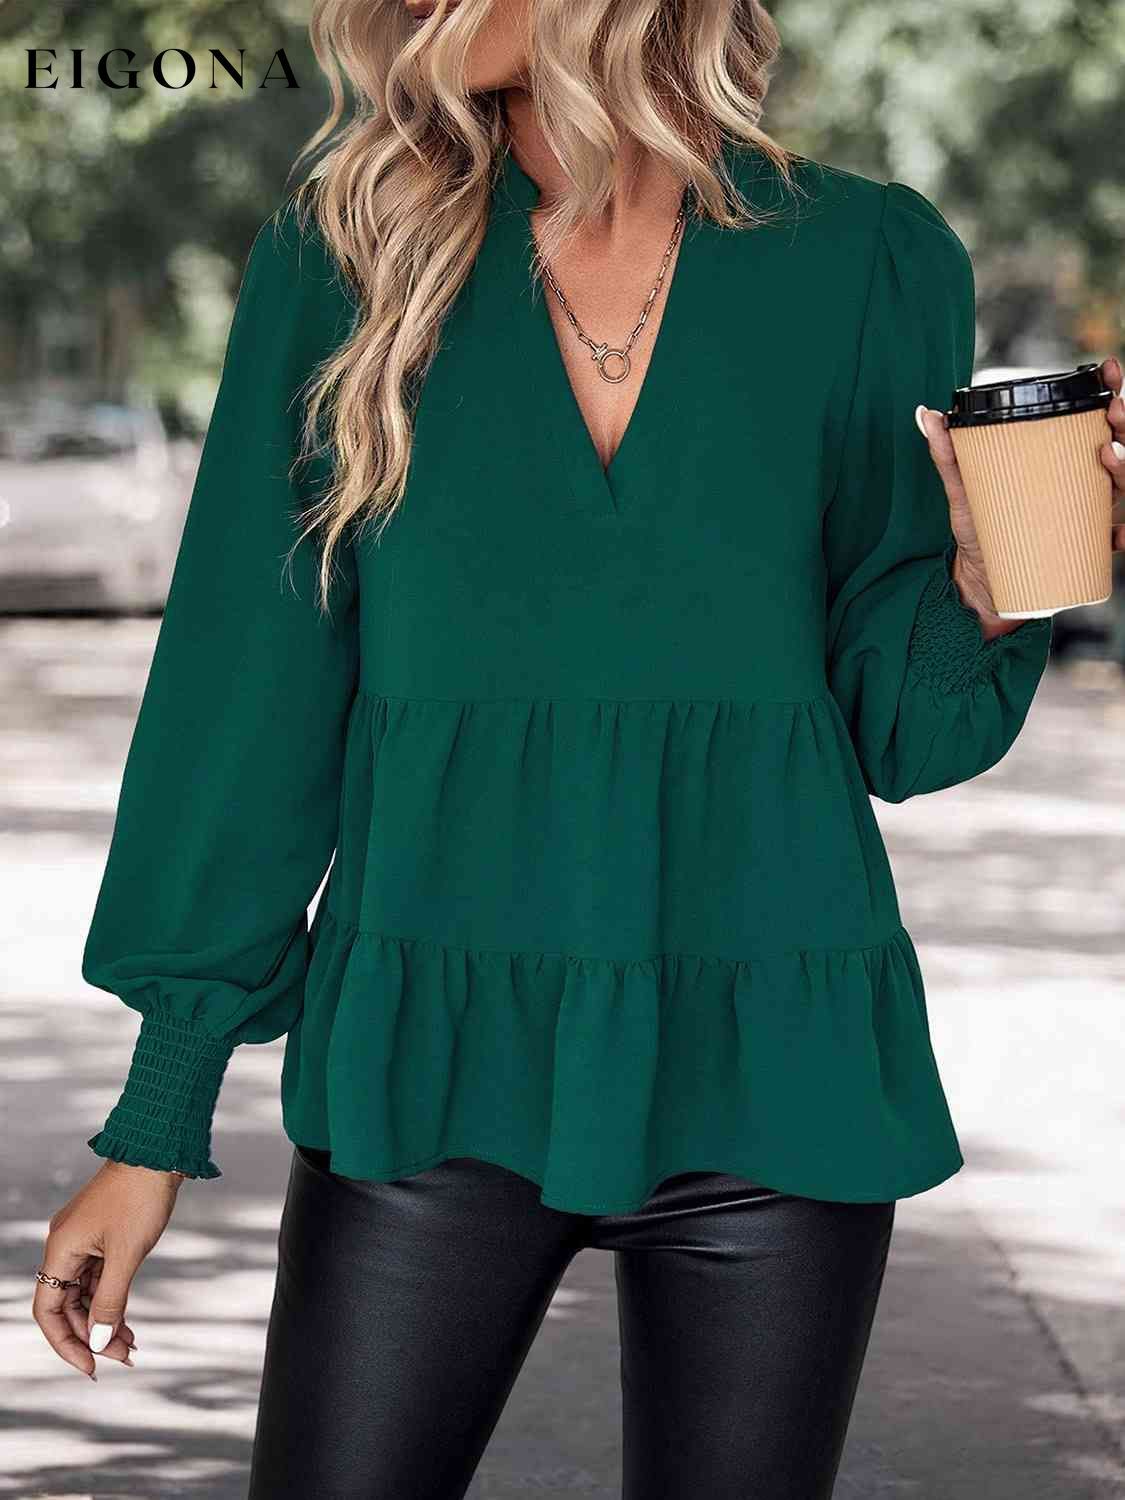 Notched Neck Lantern Sleeve Blouse Green clothes Hundredth long sleeve shirts long sleeve top long sleeve tops Ship From Overseas shirt shirts top tops